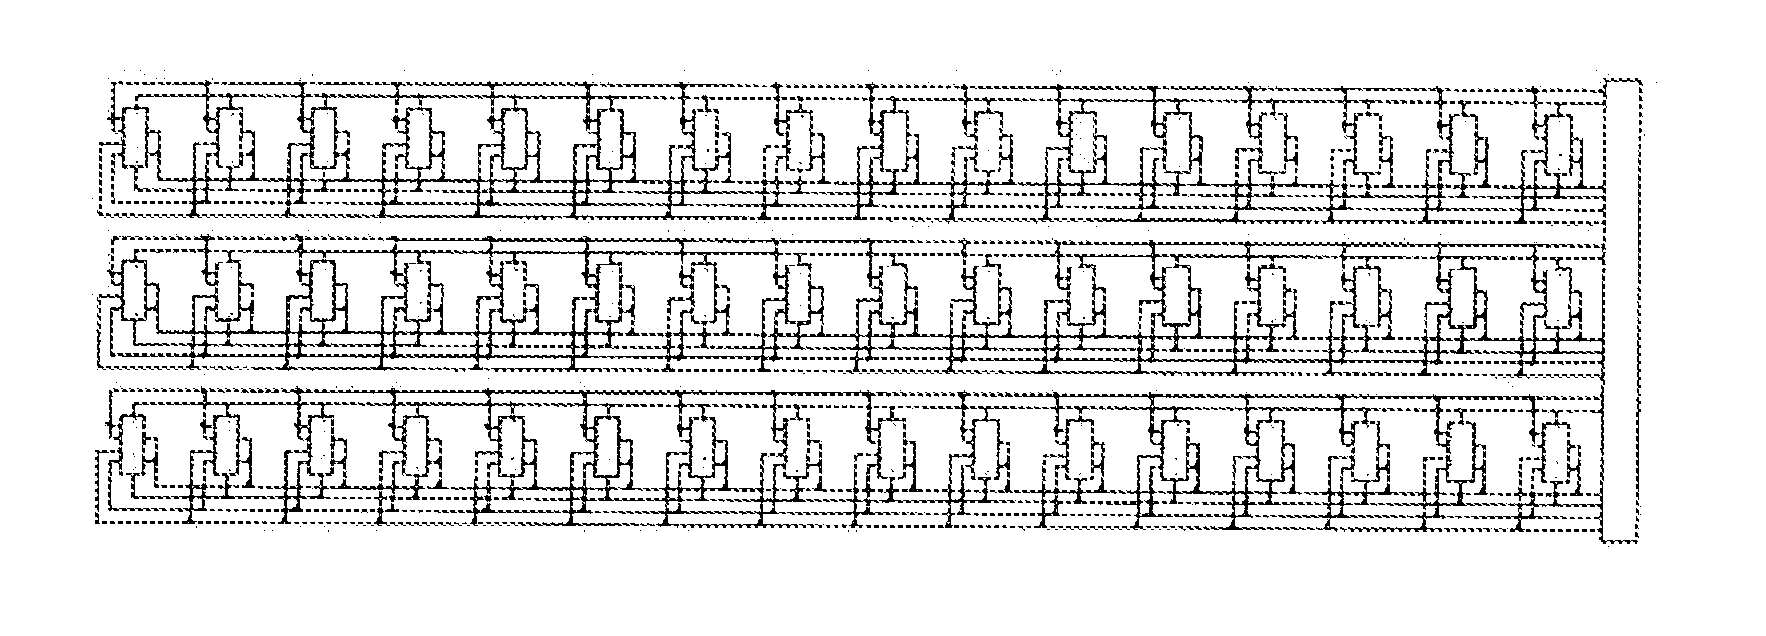 48-channel arrayed isosbestic wavelength detection system